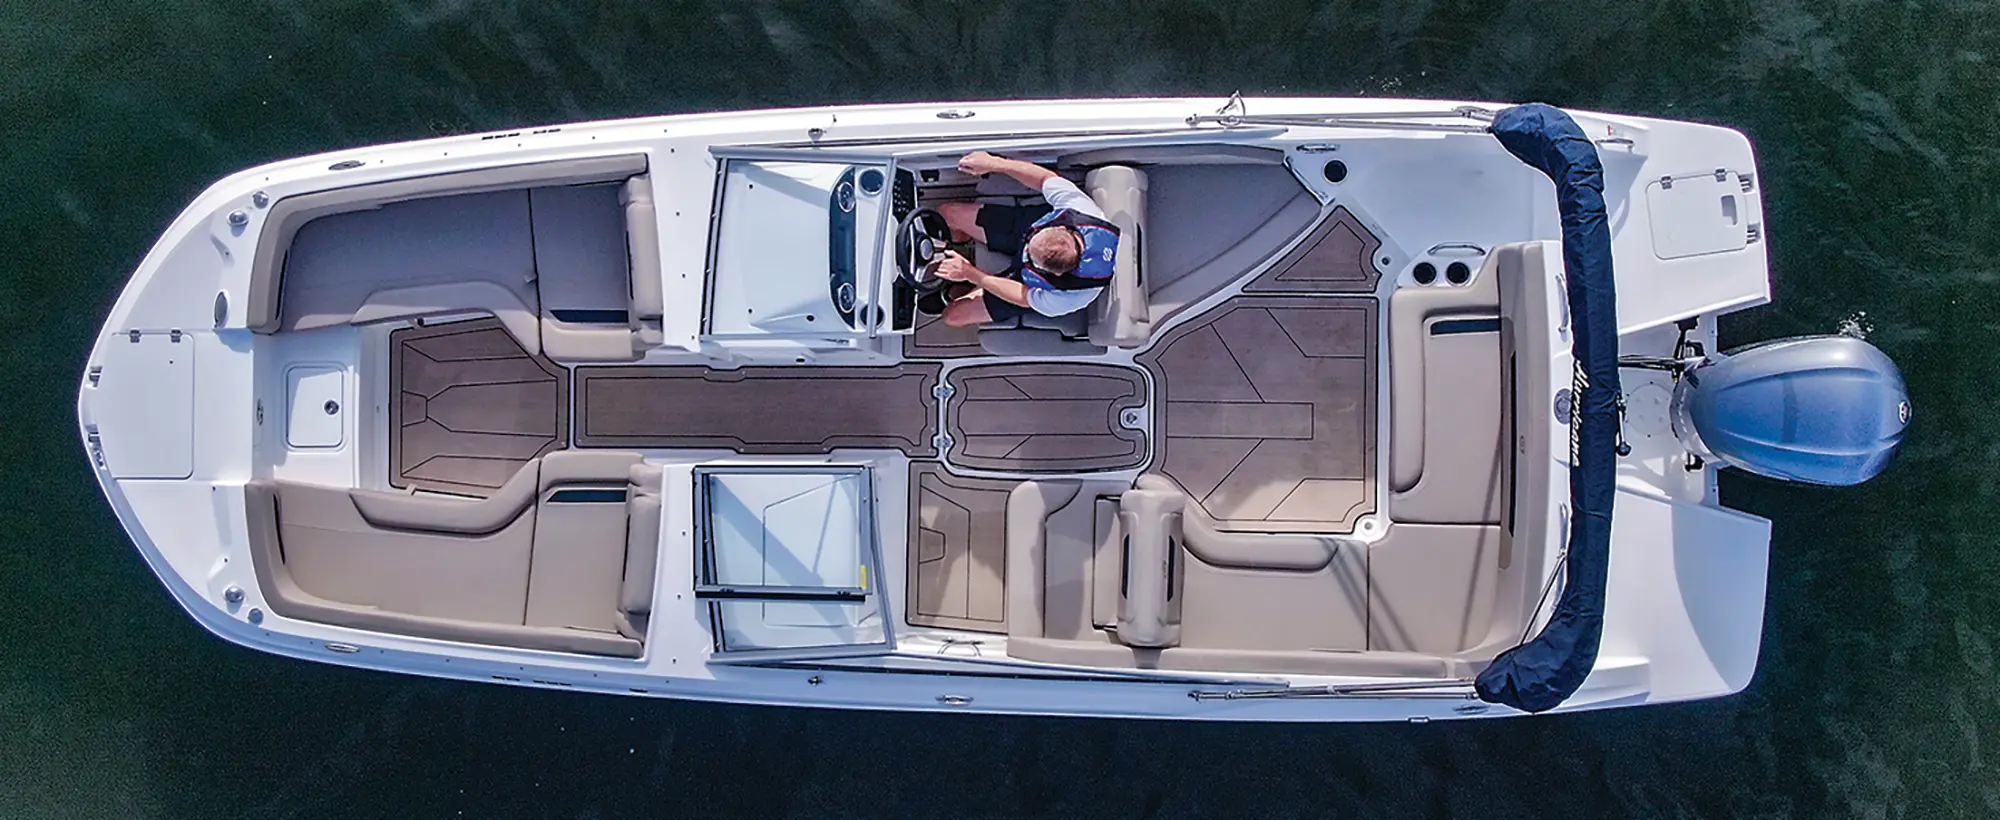 Aerial angle side photo view of the Hurricane SunDeck 235 pontoon motorboat vehicle as a man is seen driving the pontoon out in the water